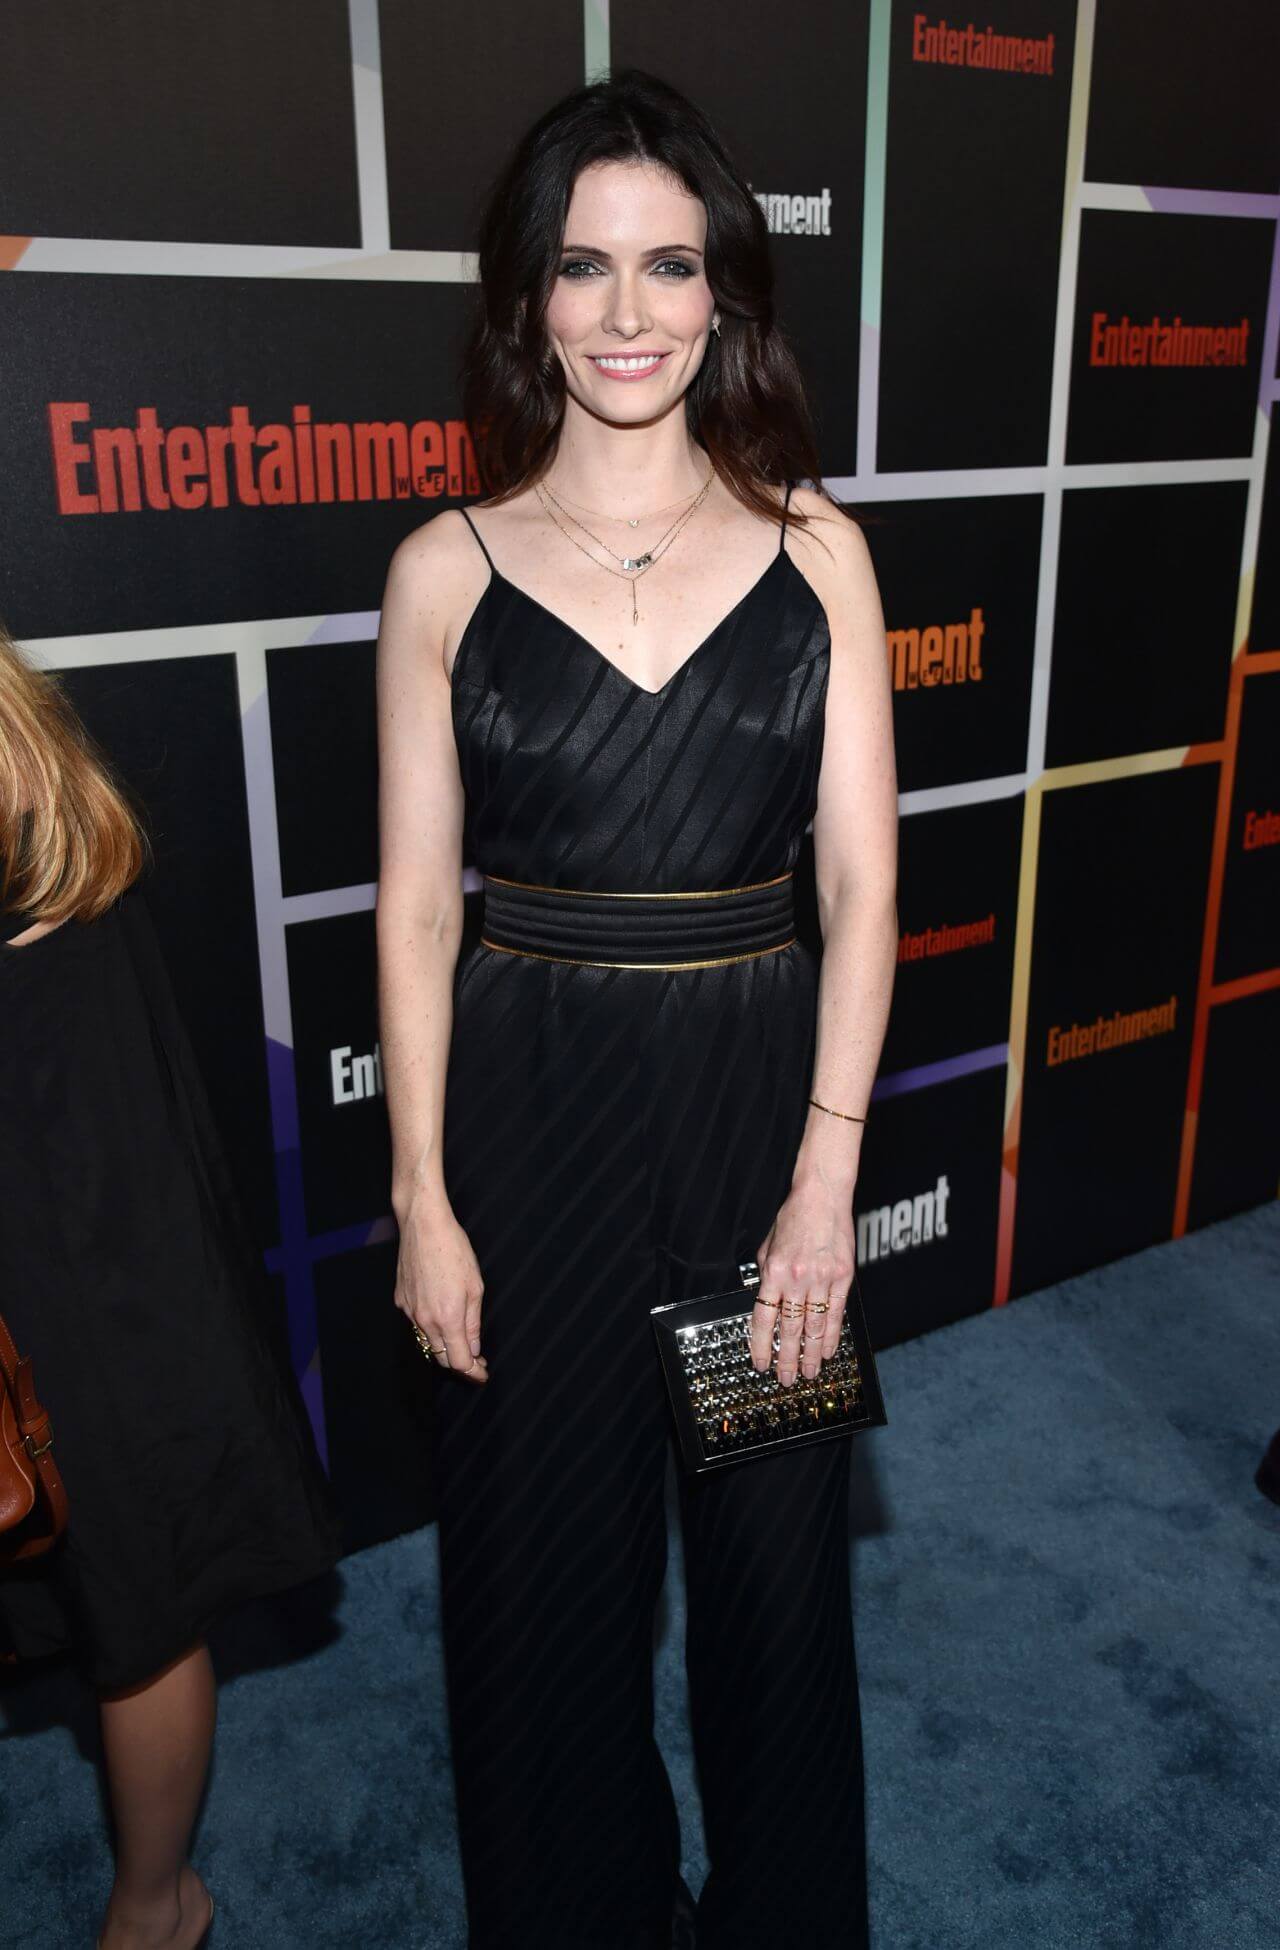 Bitsie Tulloch In Black Strap Sleeves Jumpsuit At Entertainment Weekly’s SDCC Celebration